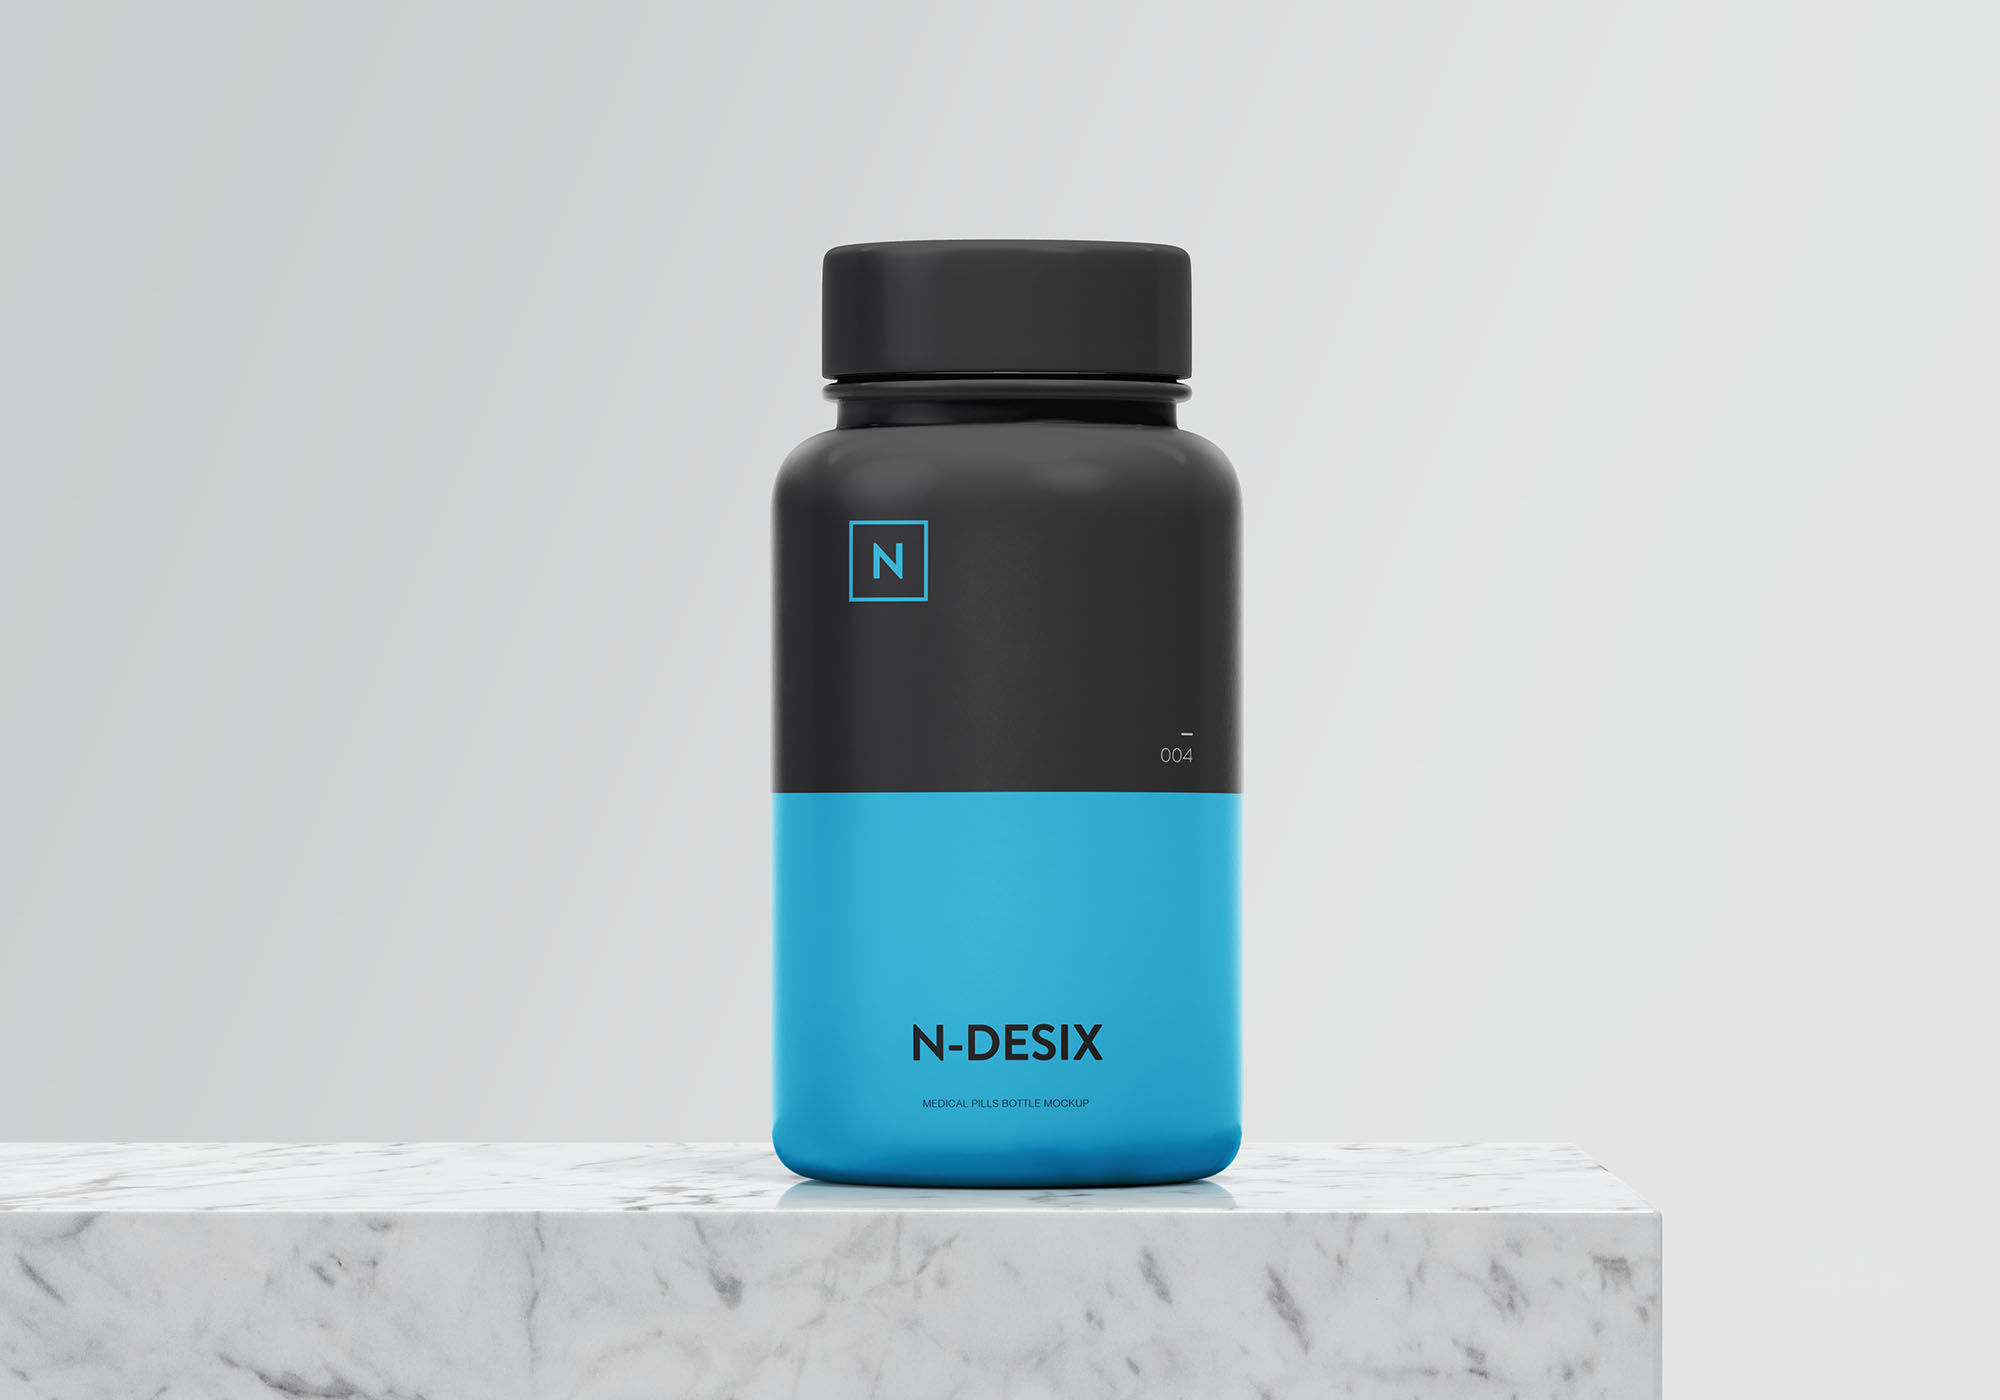 Medical/Supplement Bottle Standing on Marble Stone Mockup FREE PSD